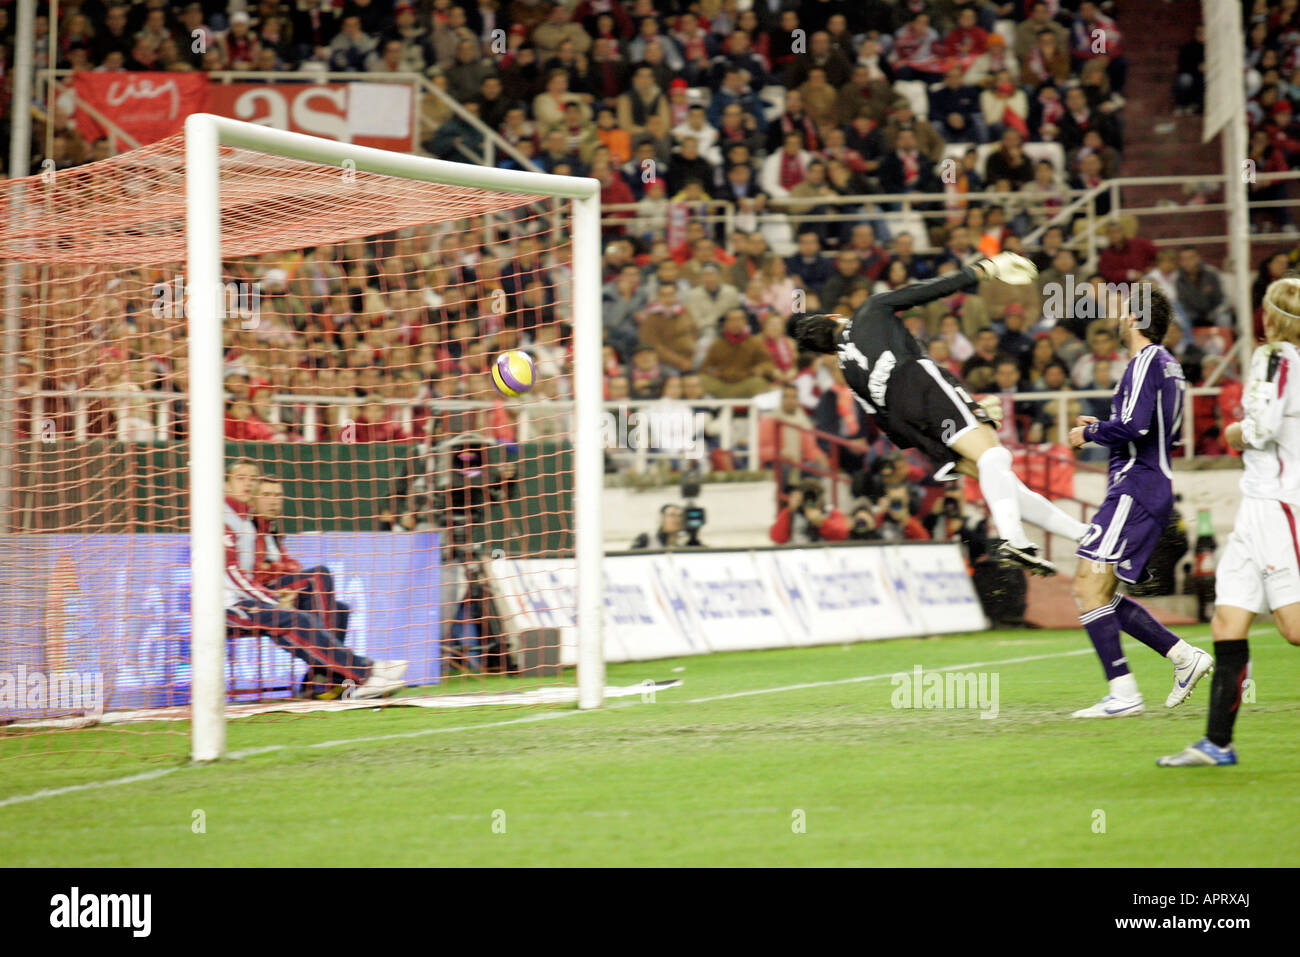 The ball entering the goal shot by Beckham. Stock Photo